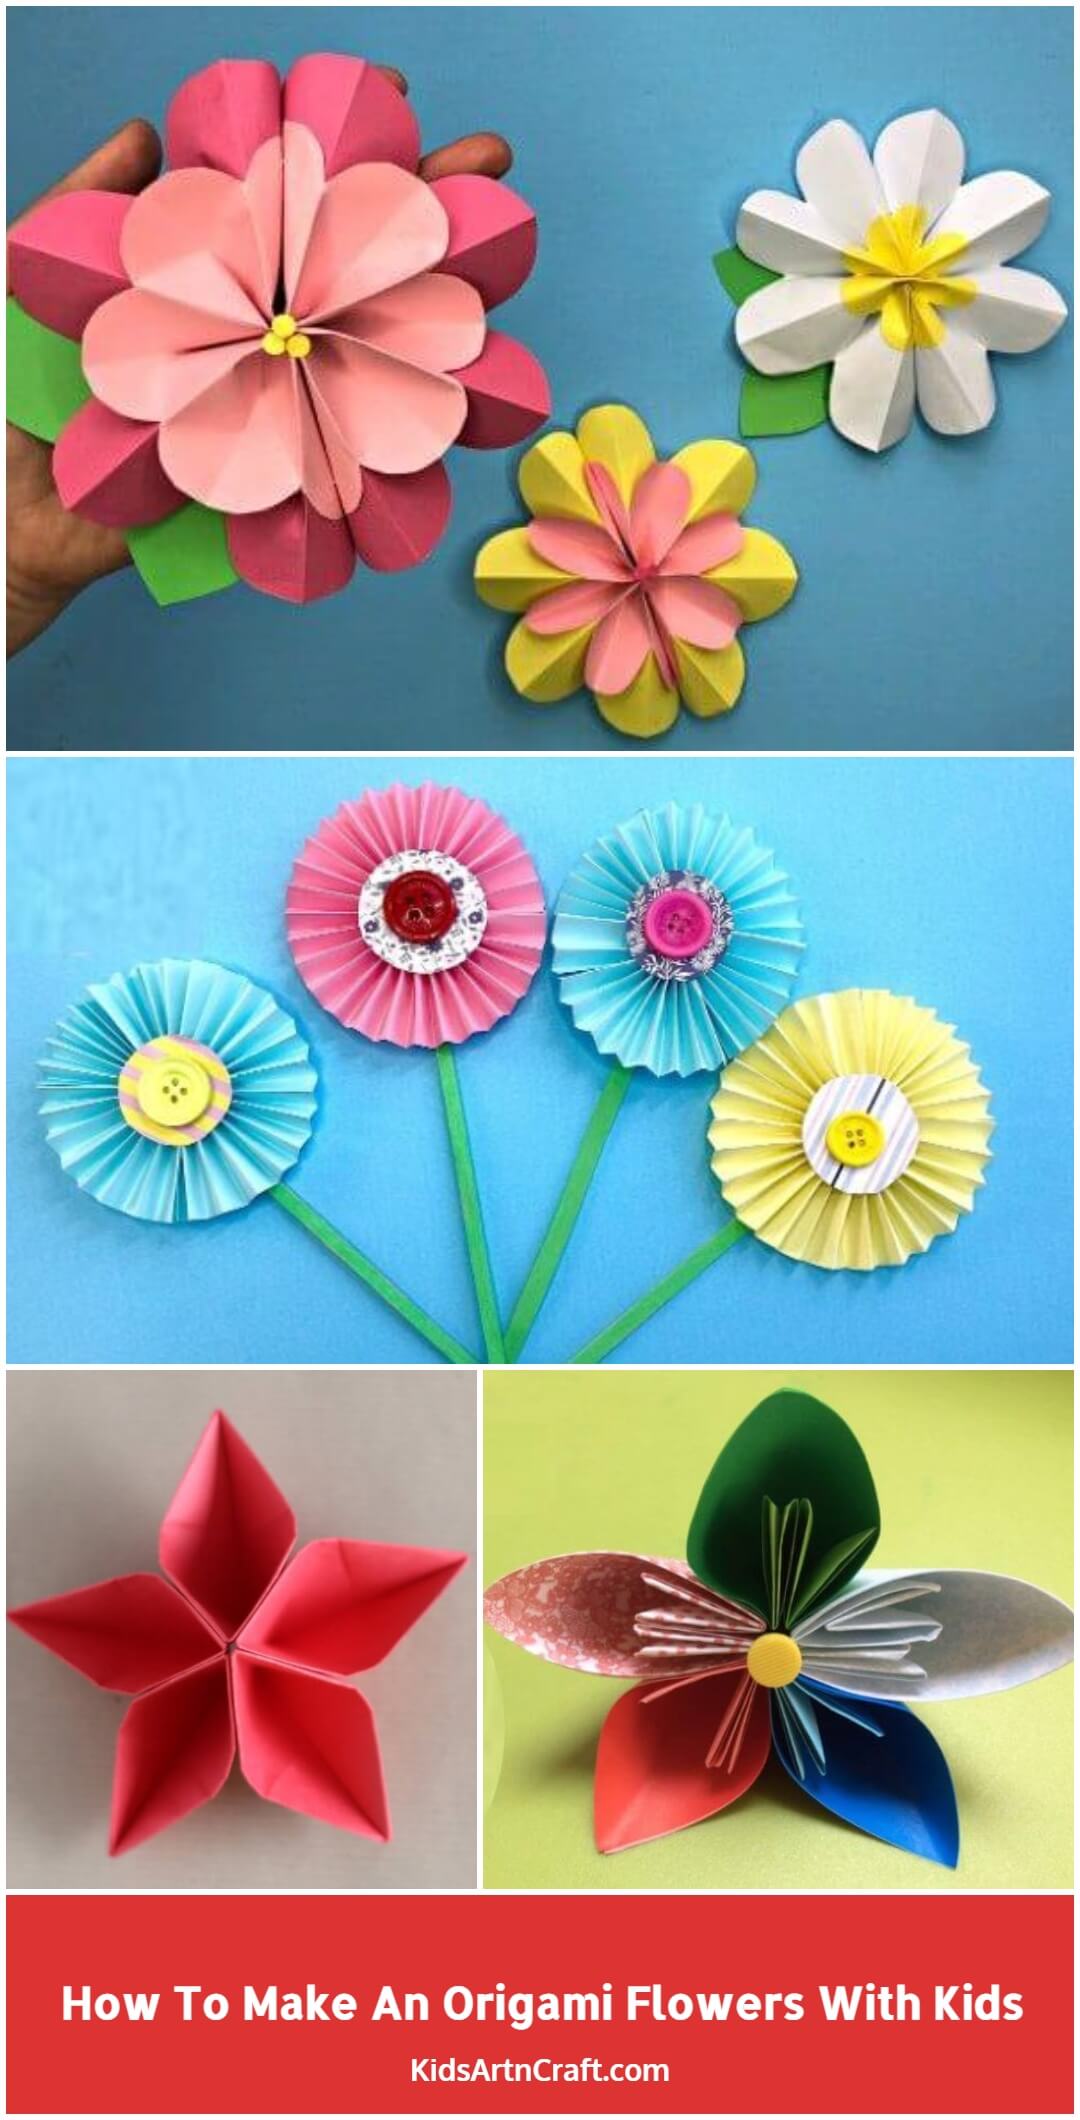 How To Make An Origami Flowers With Kids